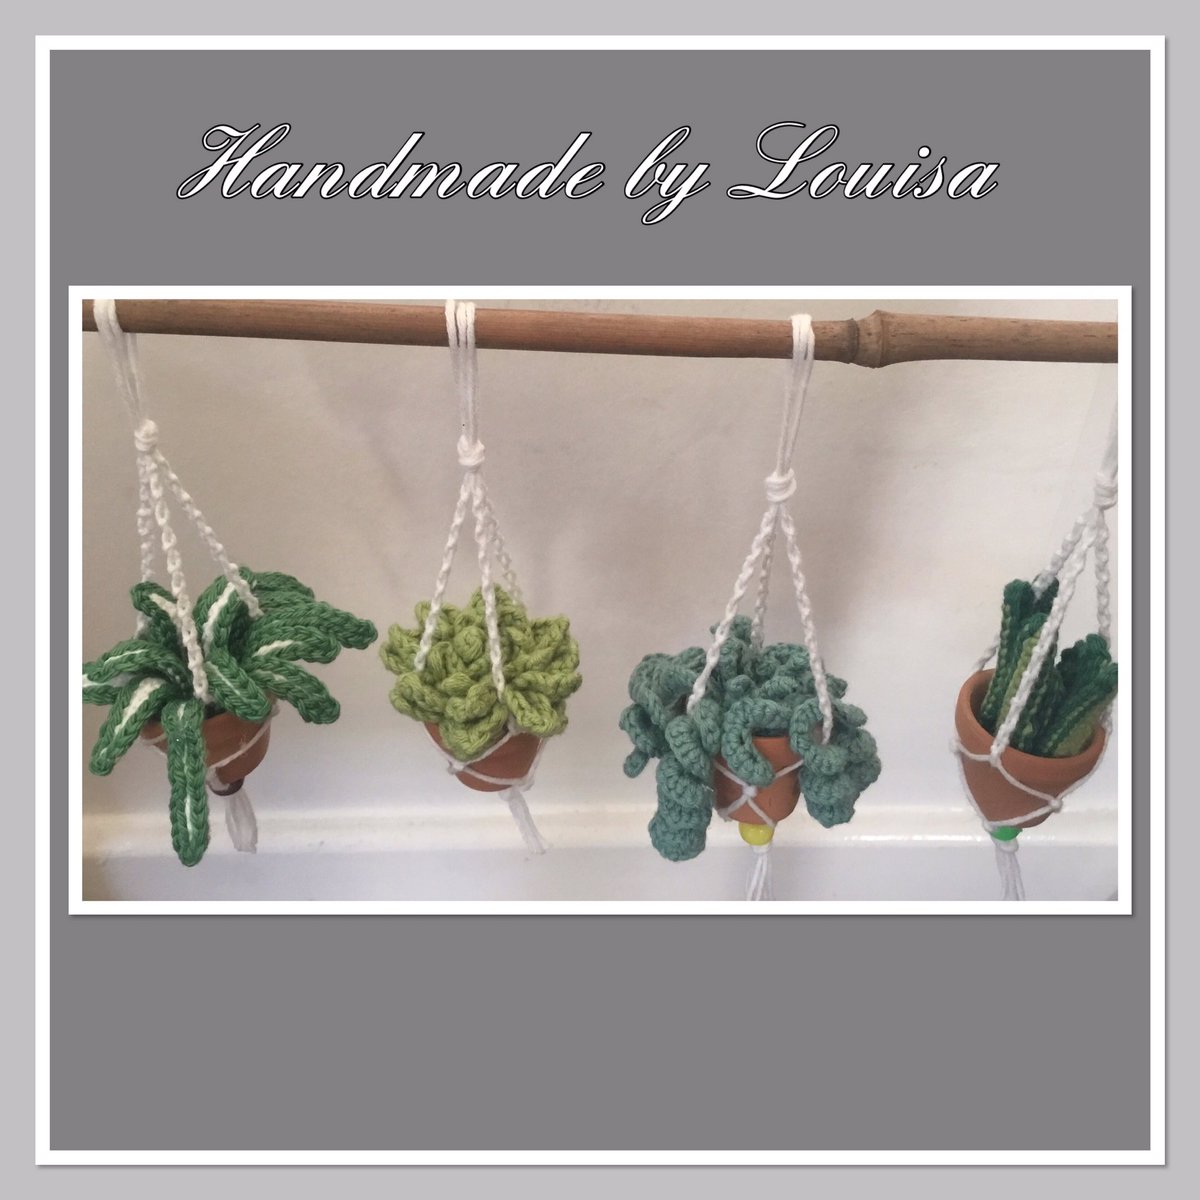 Introducing my miniature hanging pot plants 🪴 ….succulents, spider plants, mother in laws tongue… what more could you want??? Crocheted plants in a 3 cm terracotta pots  #hangingplants #succulents #plants #crochet #decor #smallbiz #handmade #etsy #miniature